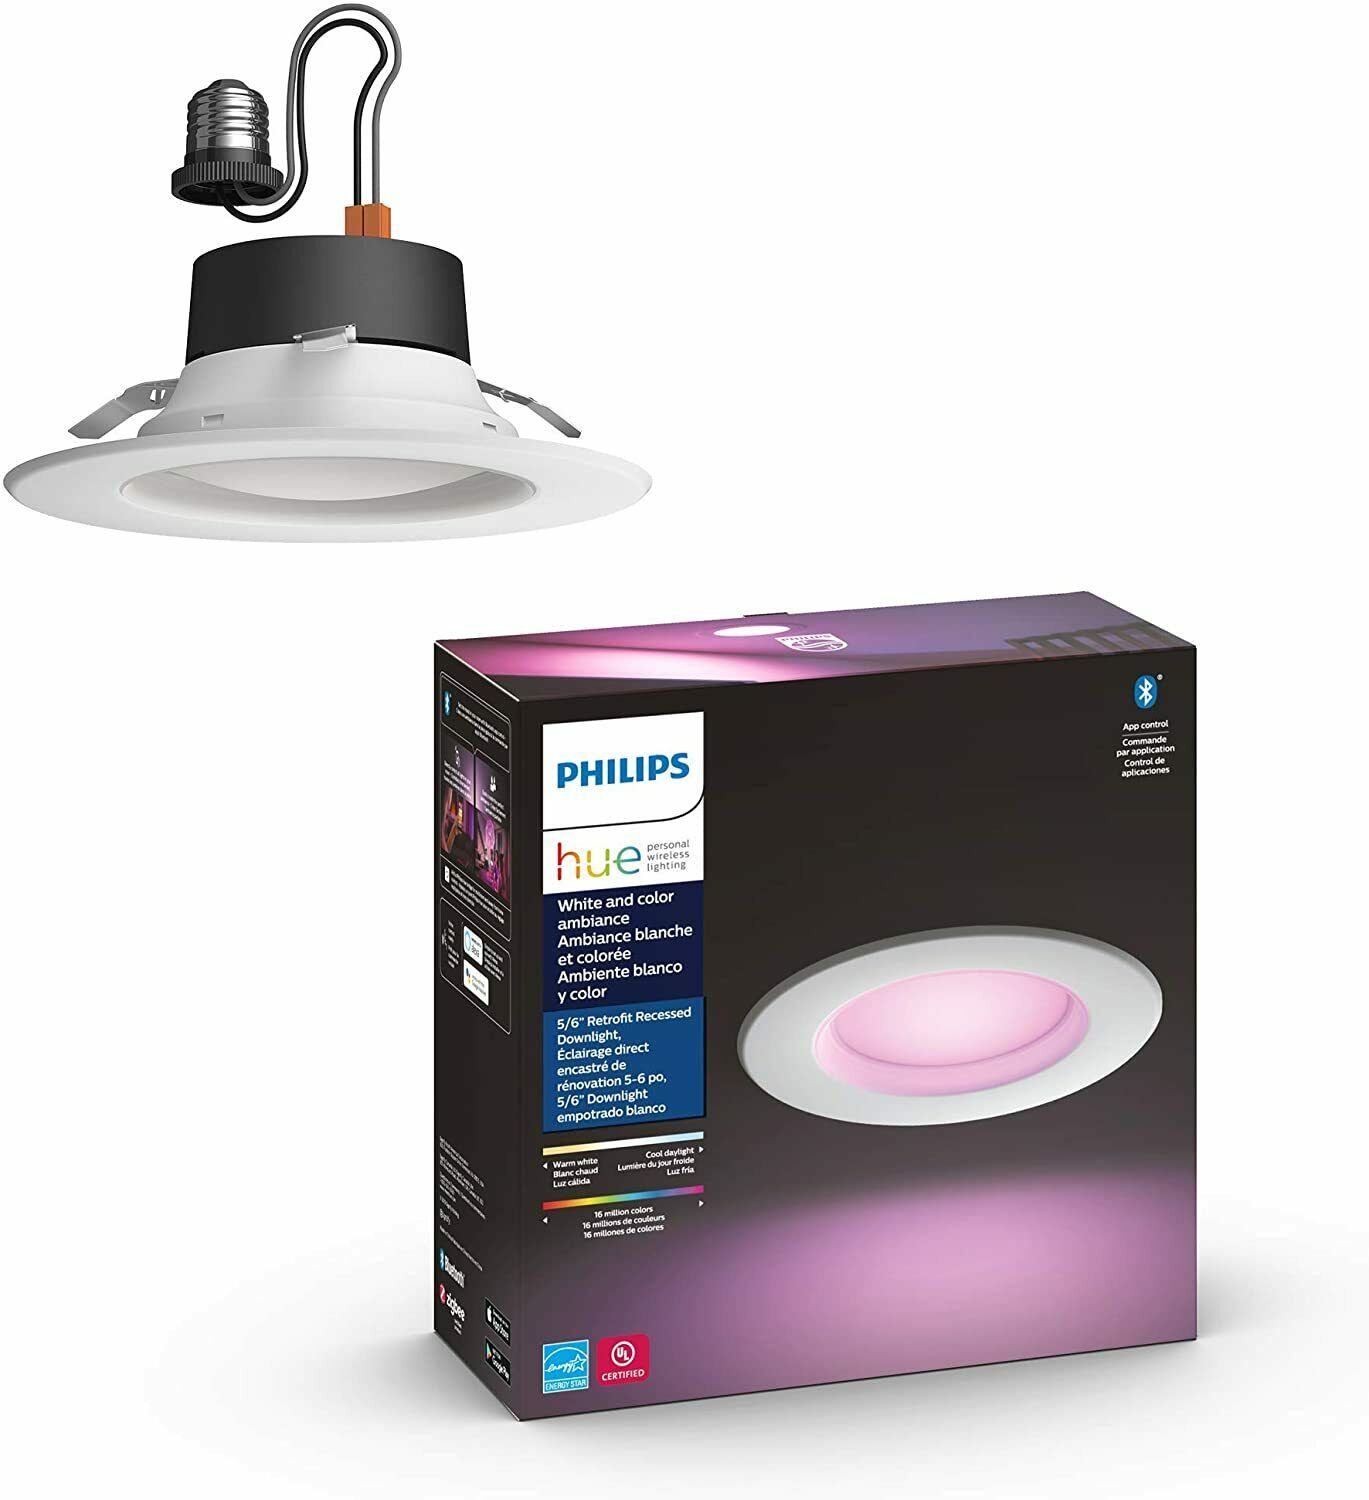 Philips Hue White & Color Ambiance Led Smart Retrofit 5/6" Recessed Downlight